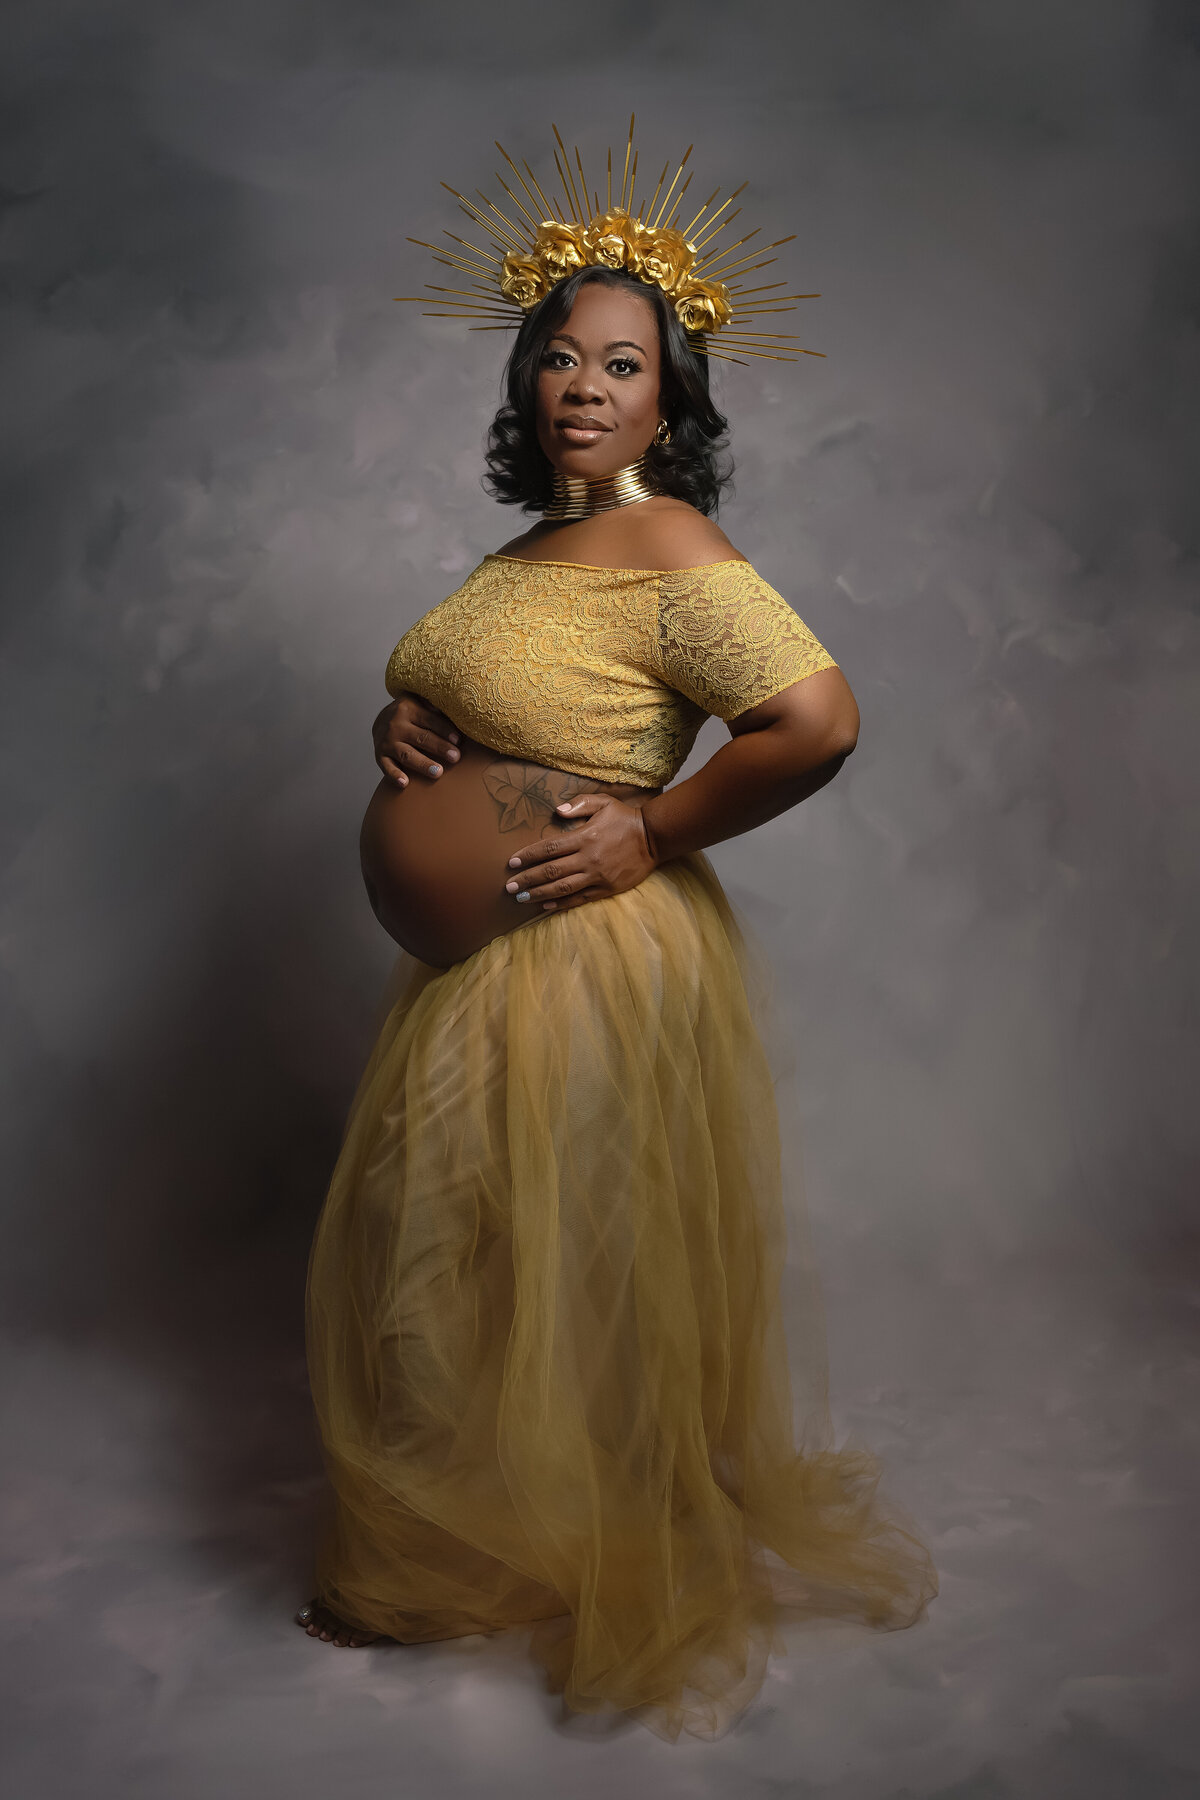 New-Orleans-maternity-photographer-26